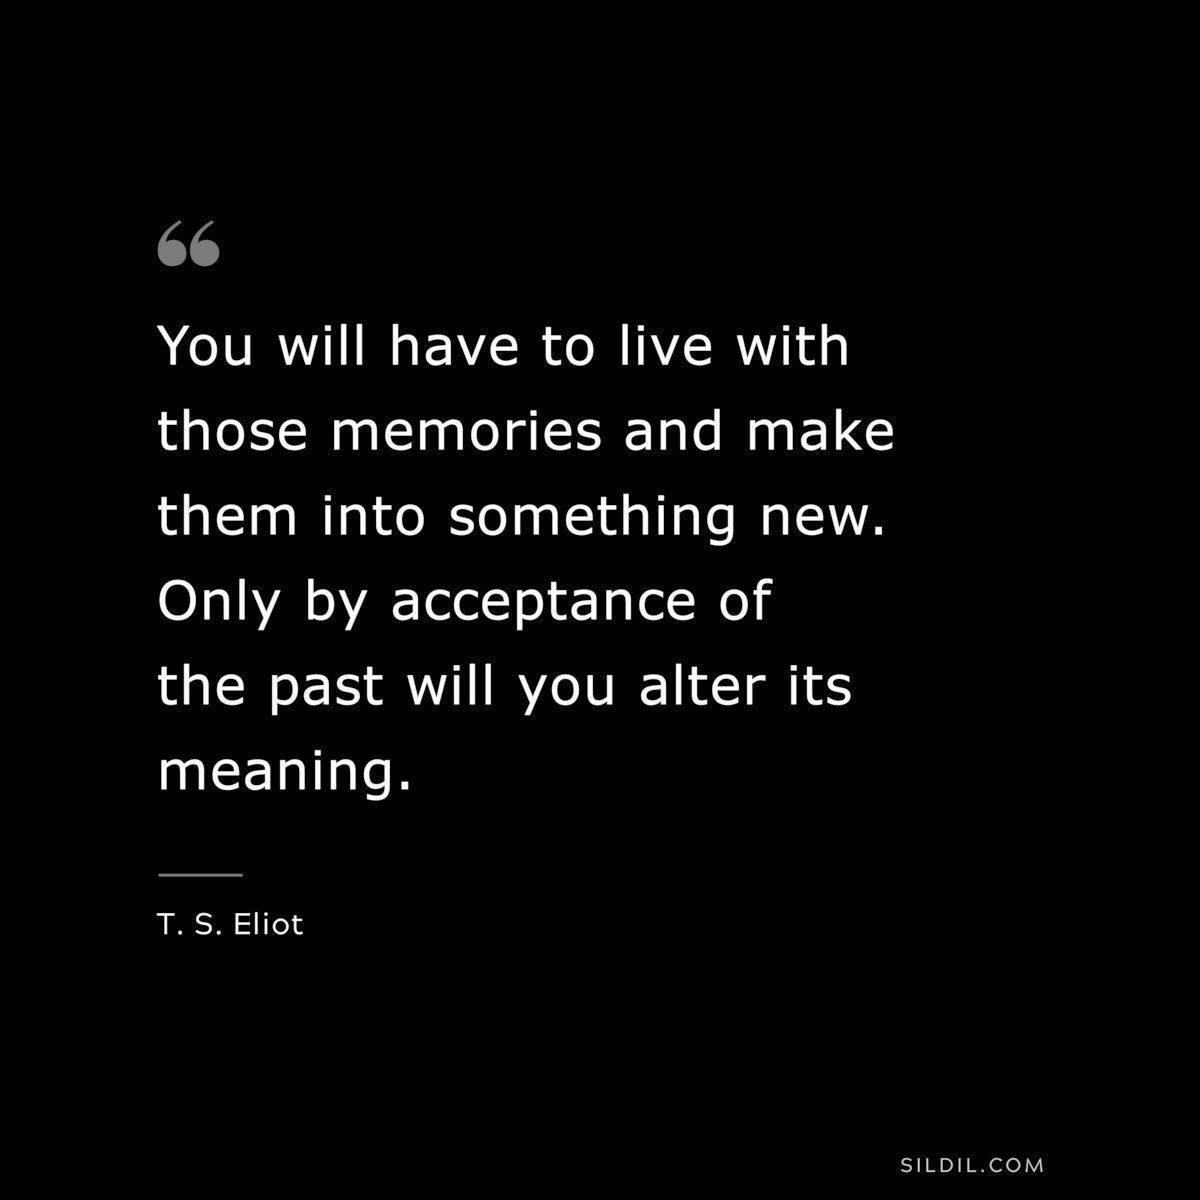 You will have to live with those memories and make them into something new. Only by acceptance of the past will you alter its meaning. ― T. S. Eliot